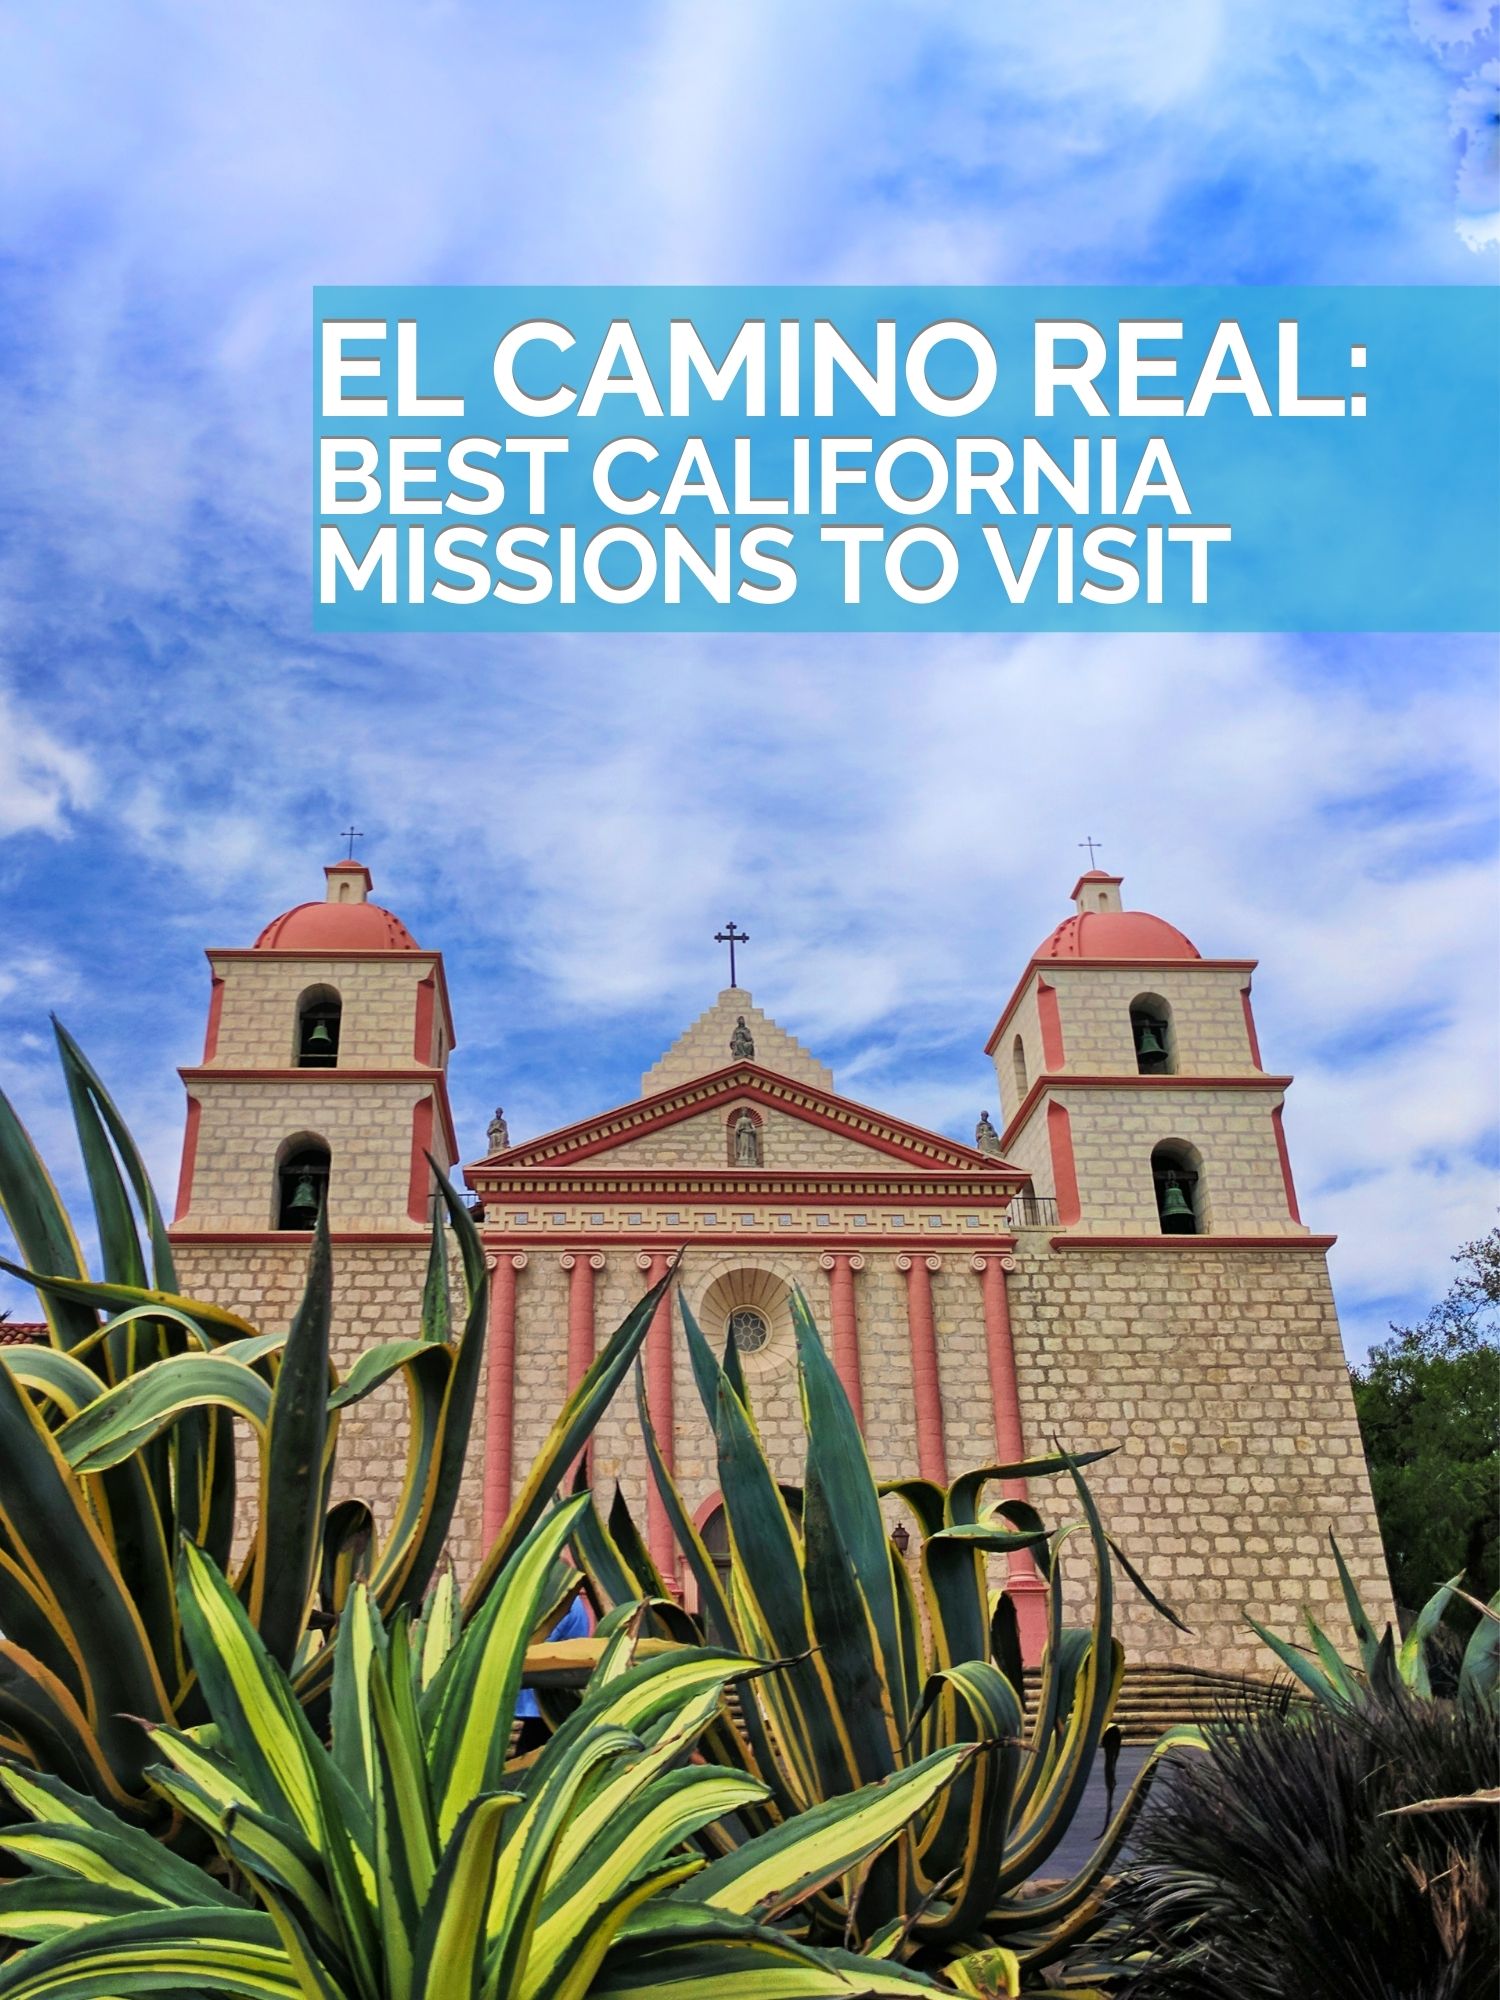 These California Missions make for great road trip stops as you drive from San Diego to San Francisco. Enjoy beautiful chapels, learn about California history with these missions along El Camino Real.